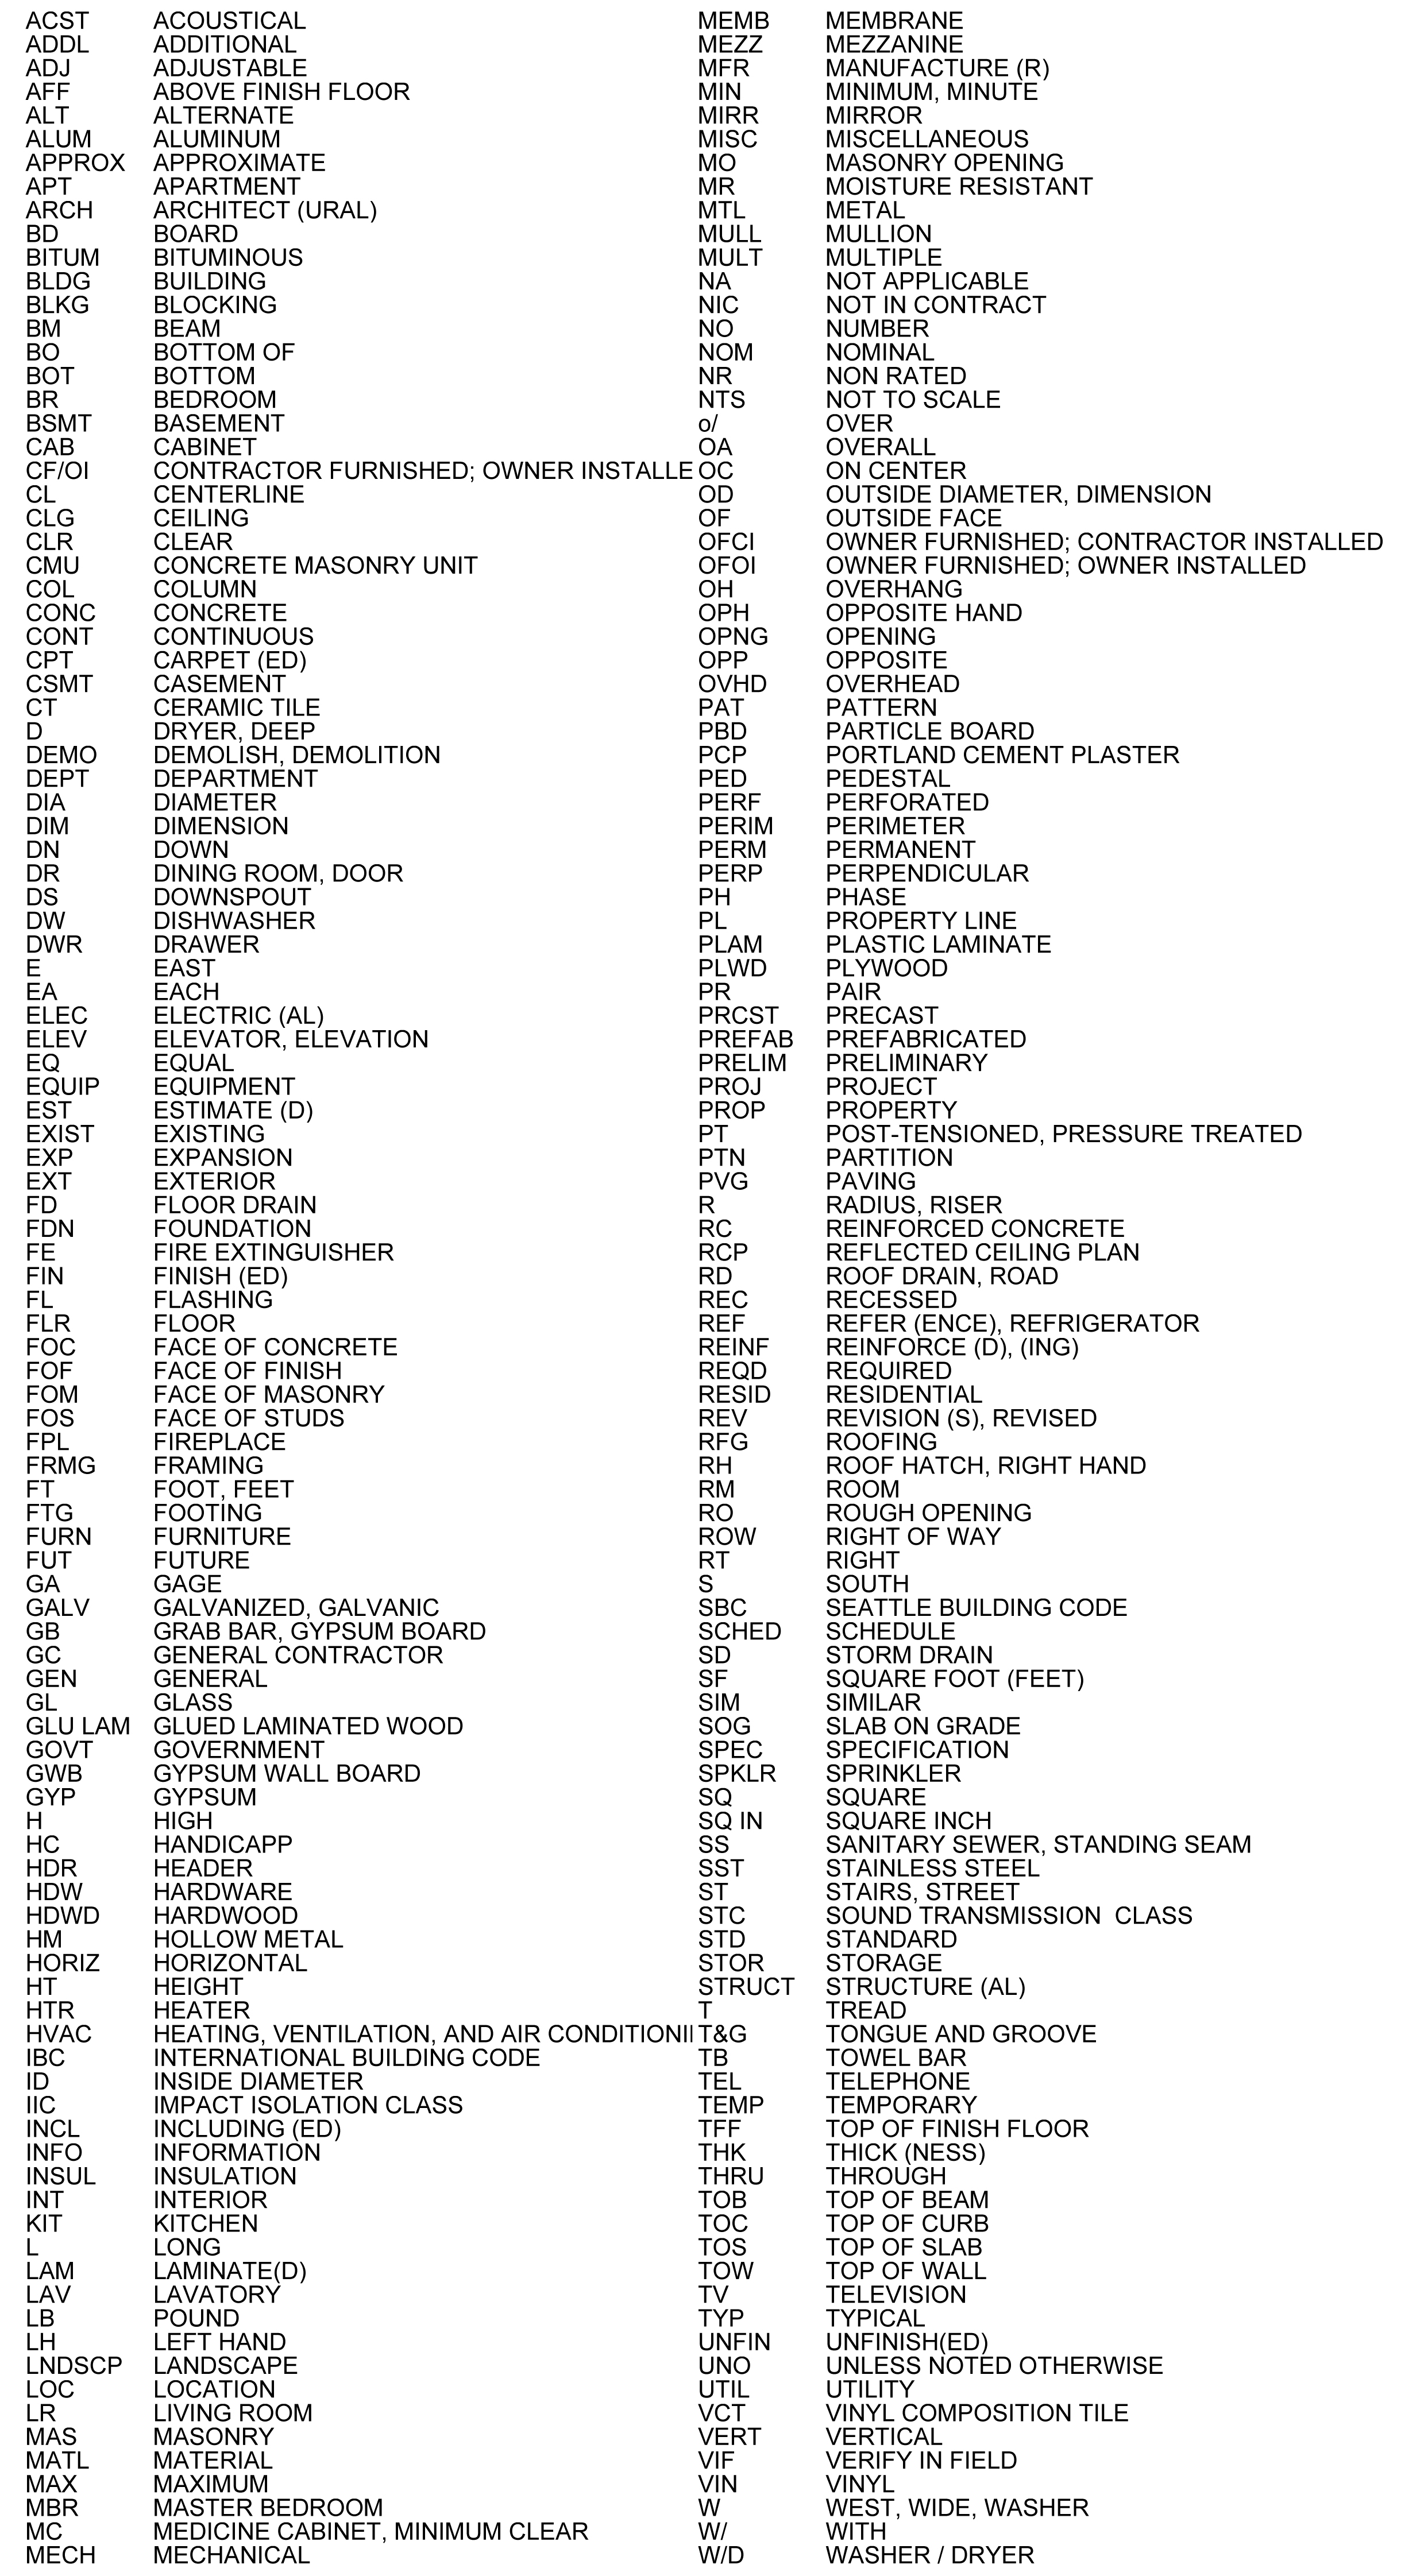 A partial list of acronyms used in architectural drawings.